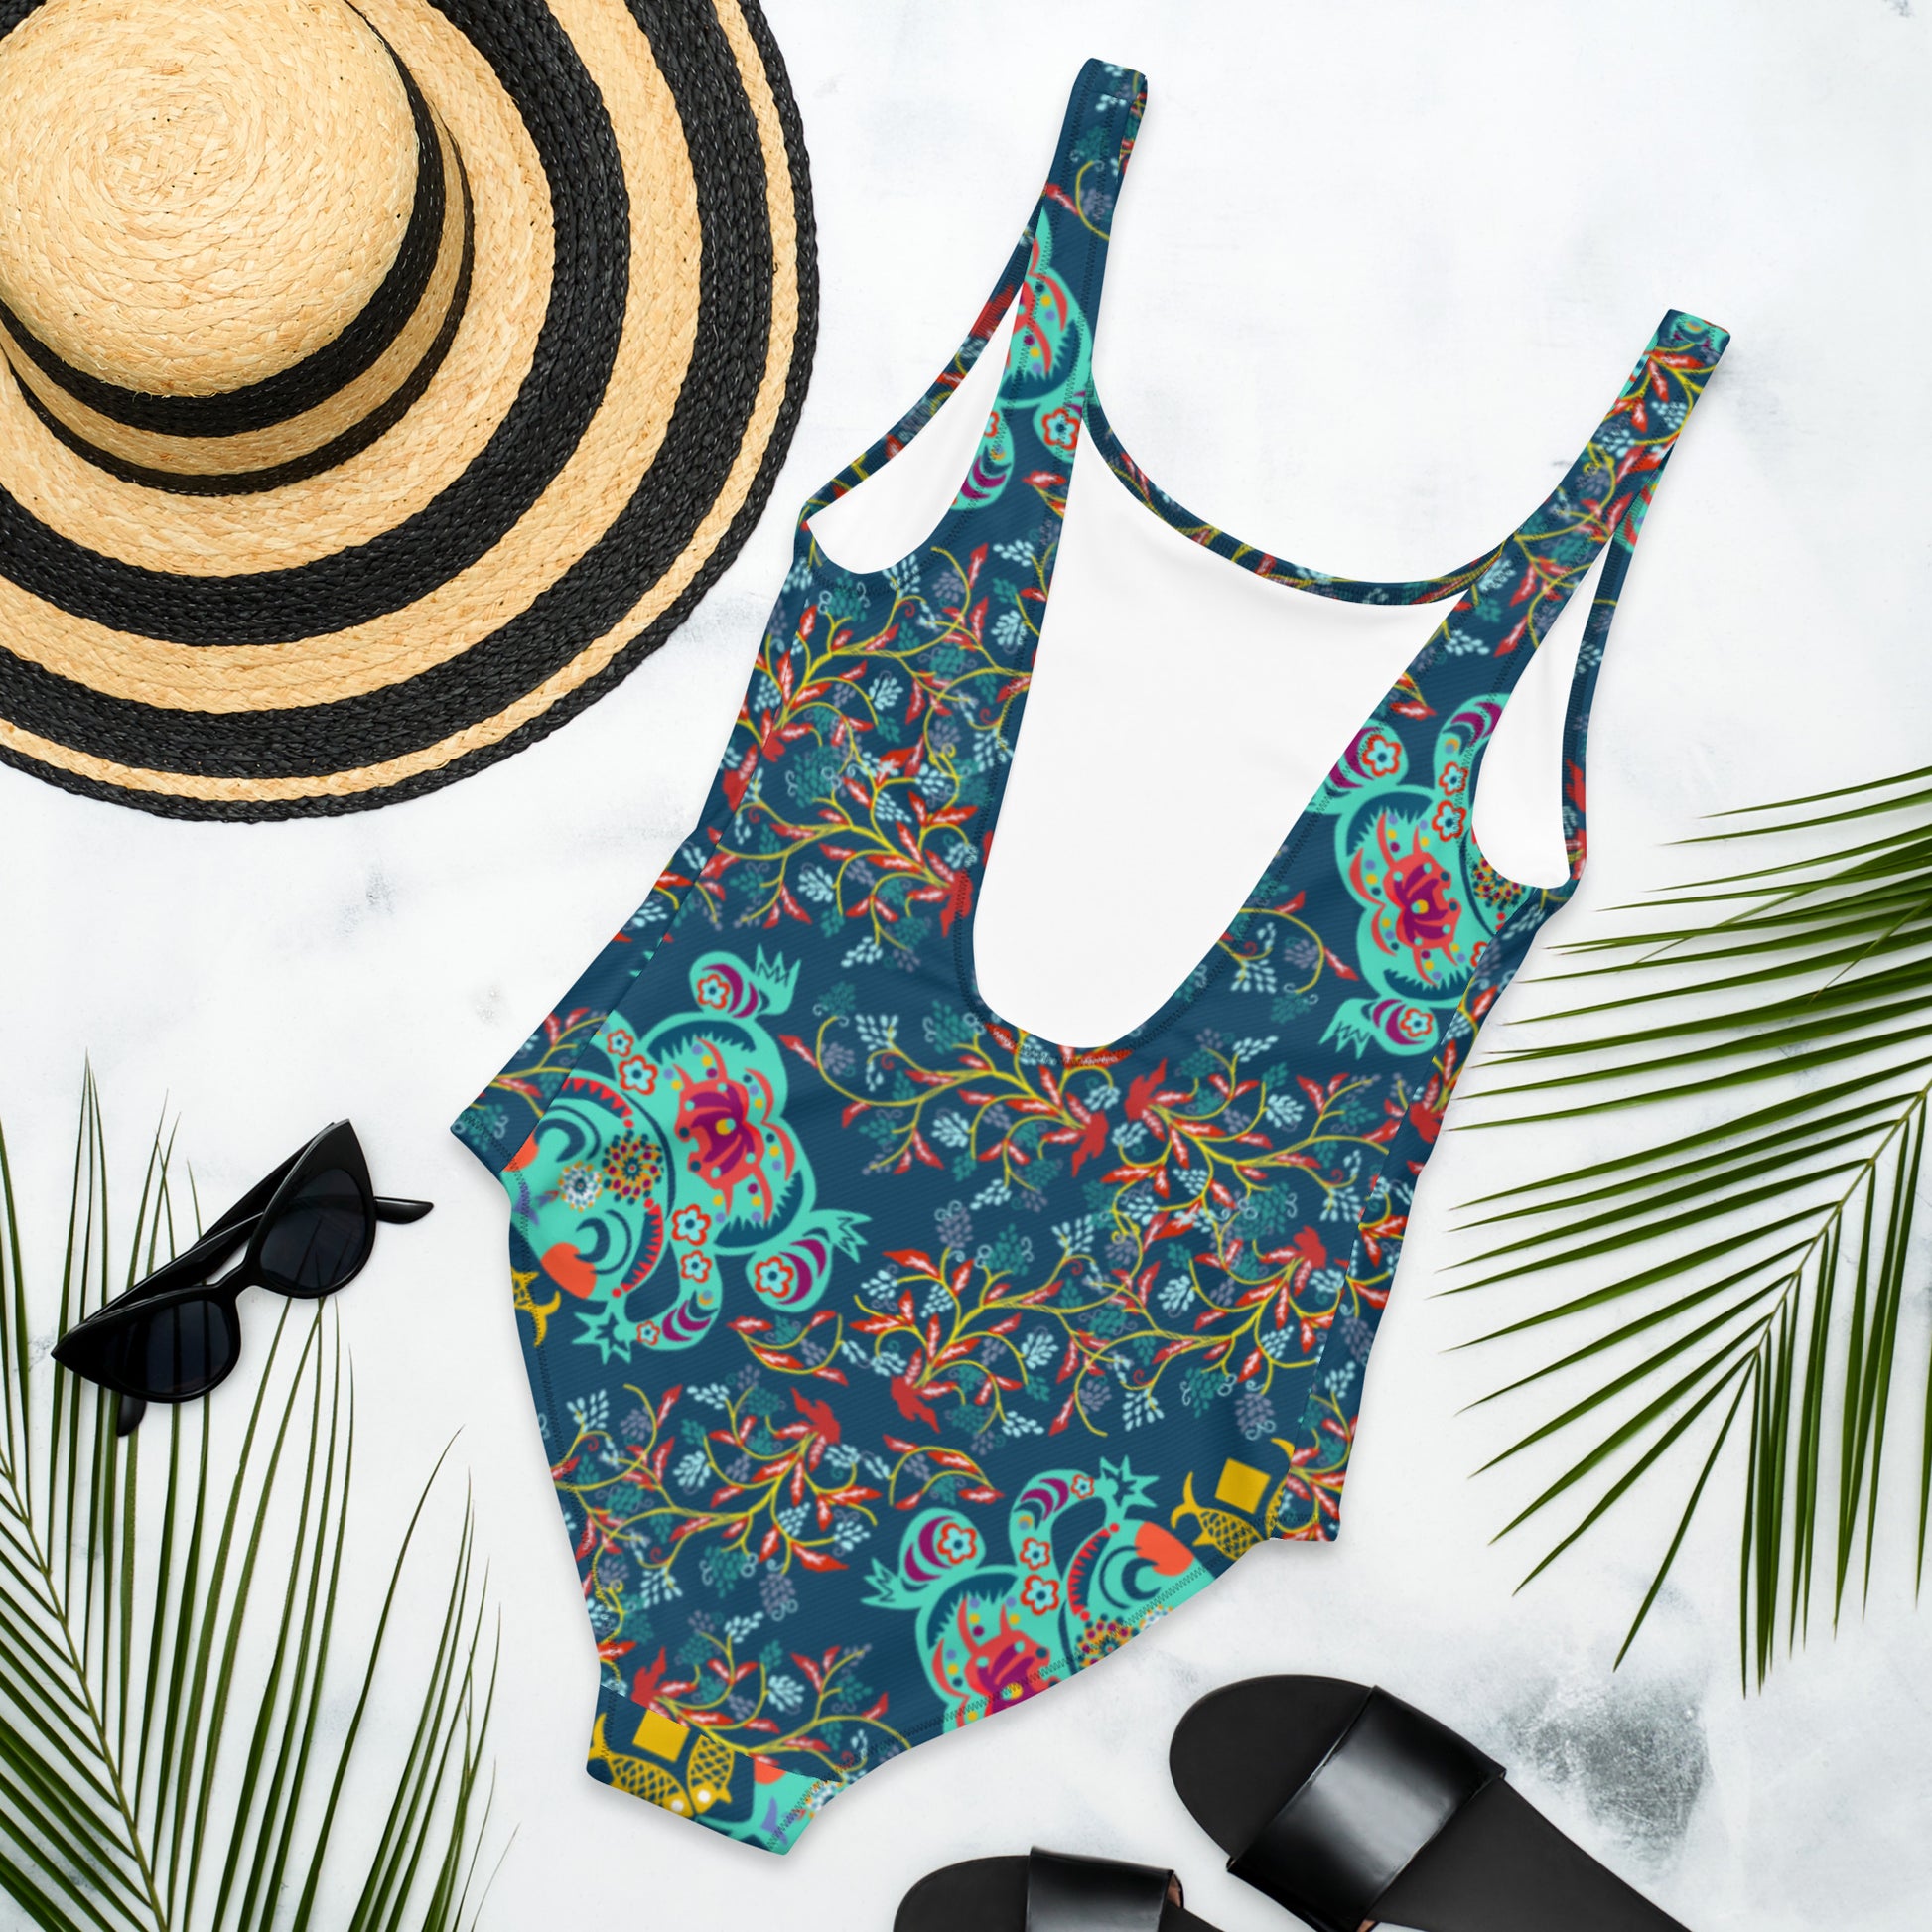 Chinese Folk Art One Piece Swimsuit - The Global Wanderer